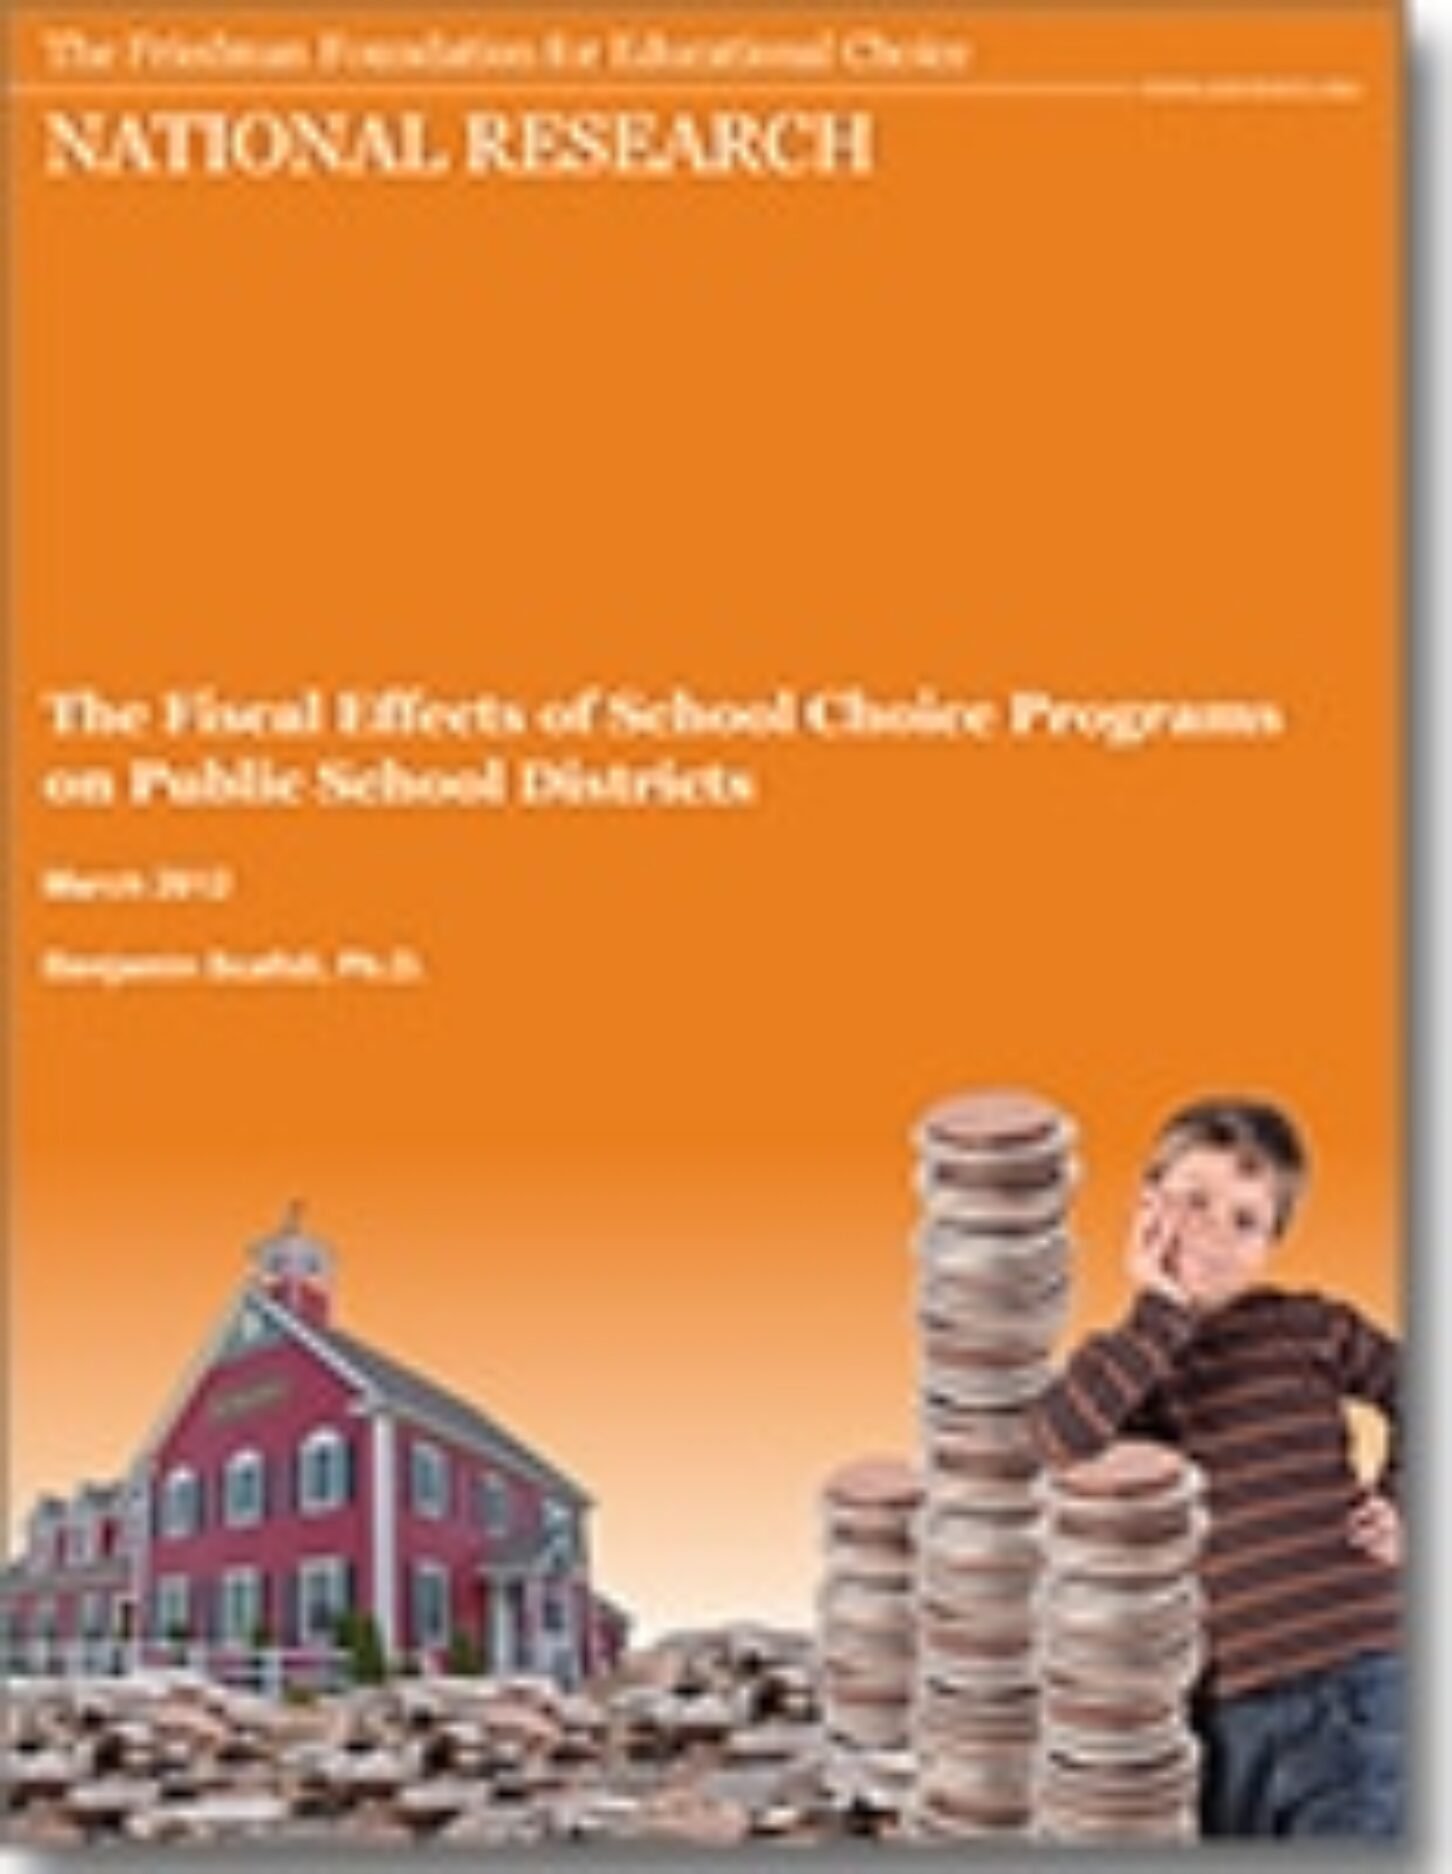 Does School Choice Financially Impact School Districts?